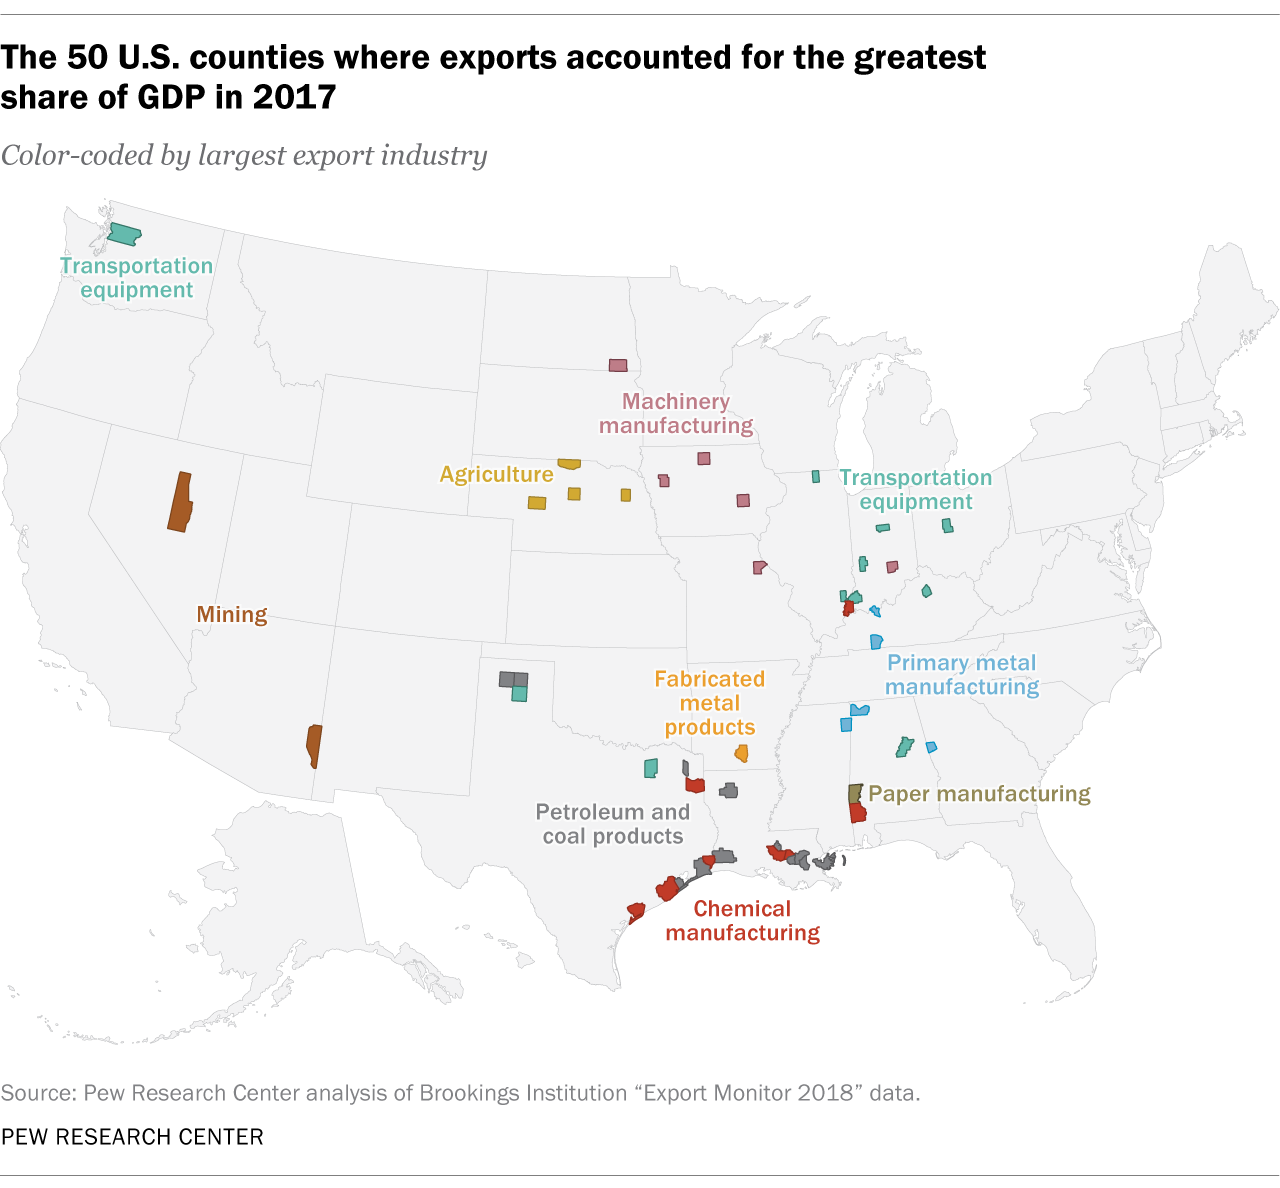 The 50 U.S. counties where exports accounted for the greatest share of GDP in 2017